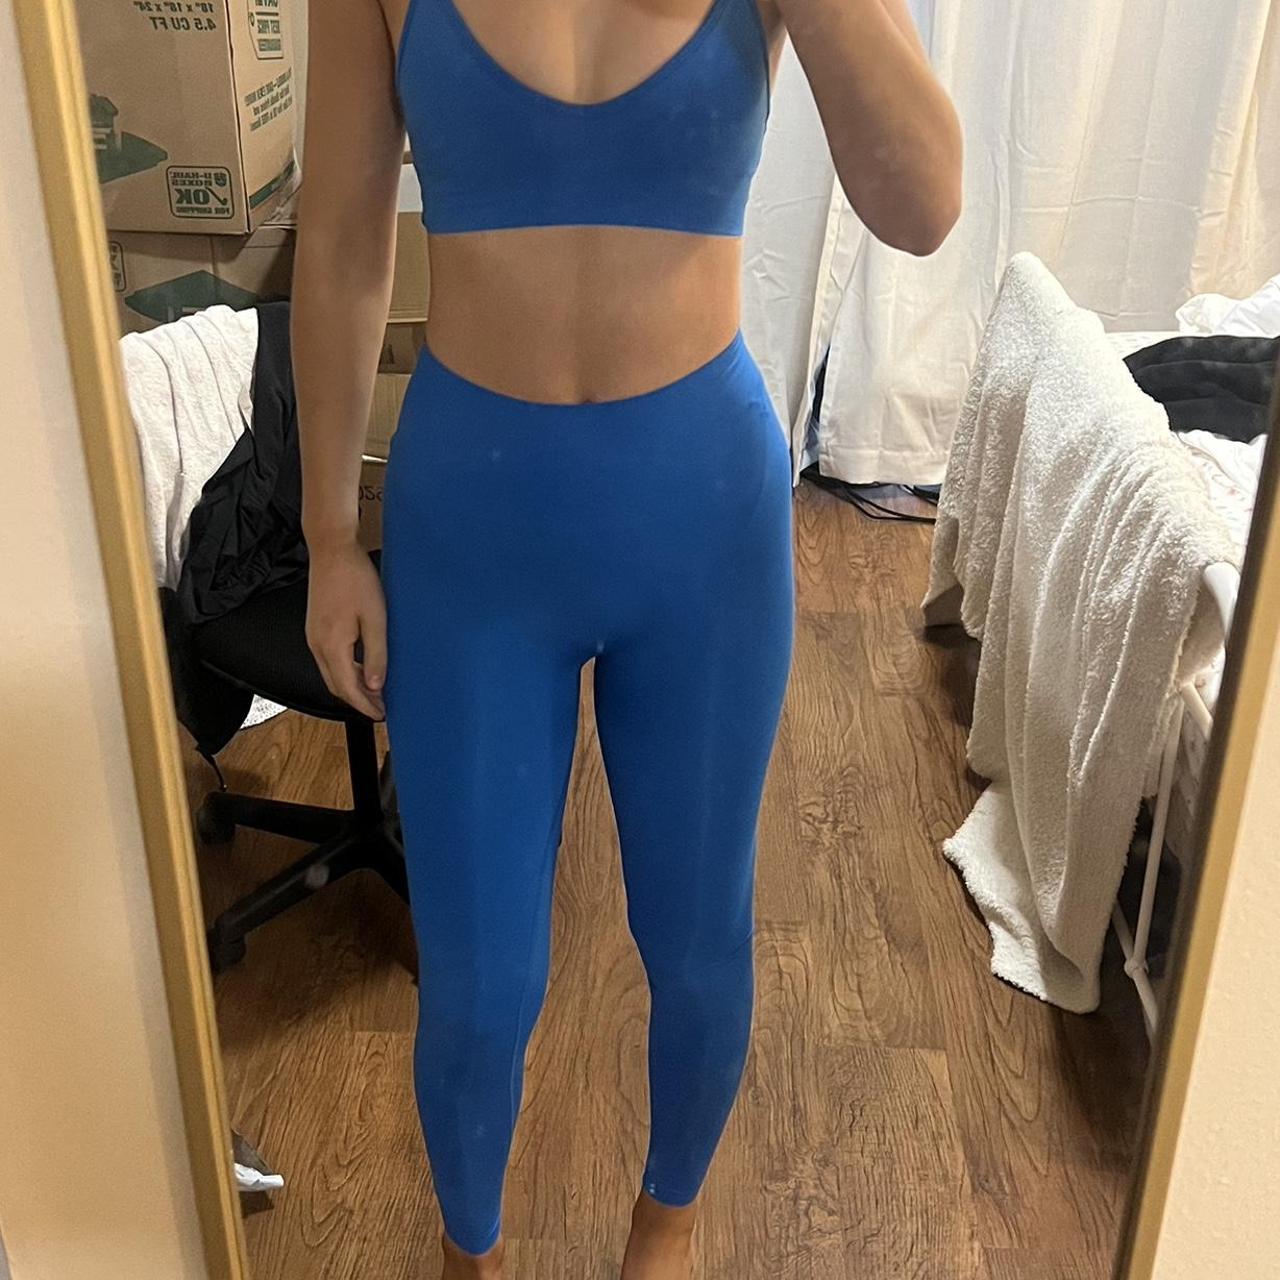 Skims soft smoothing leggings the color Azul - Depop